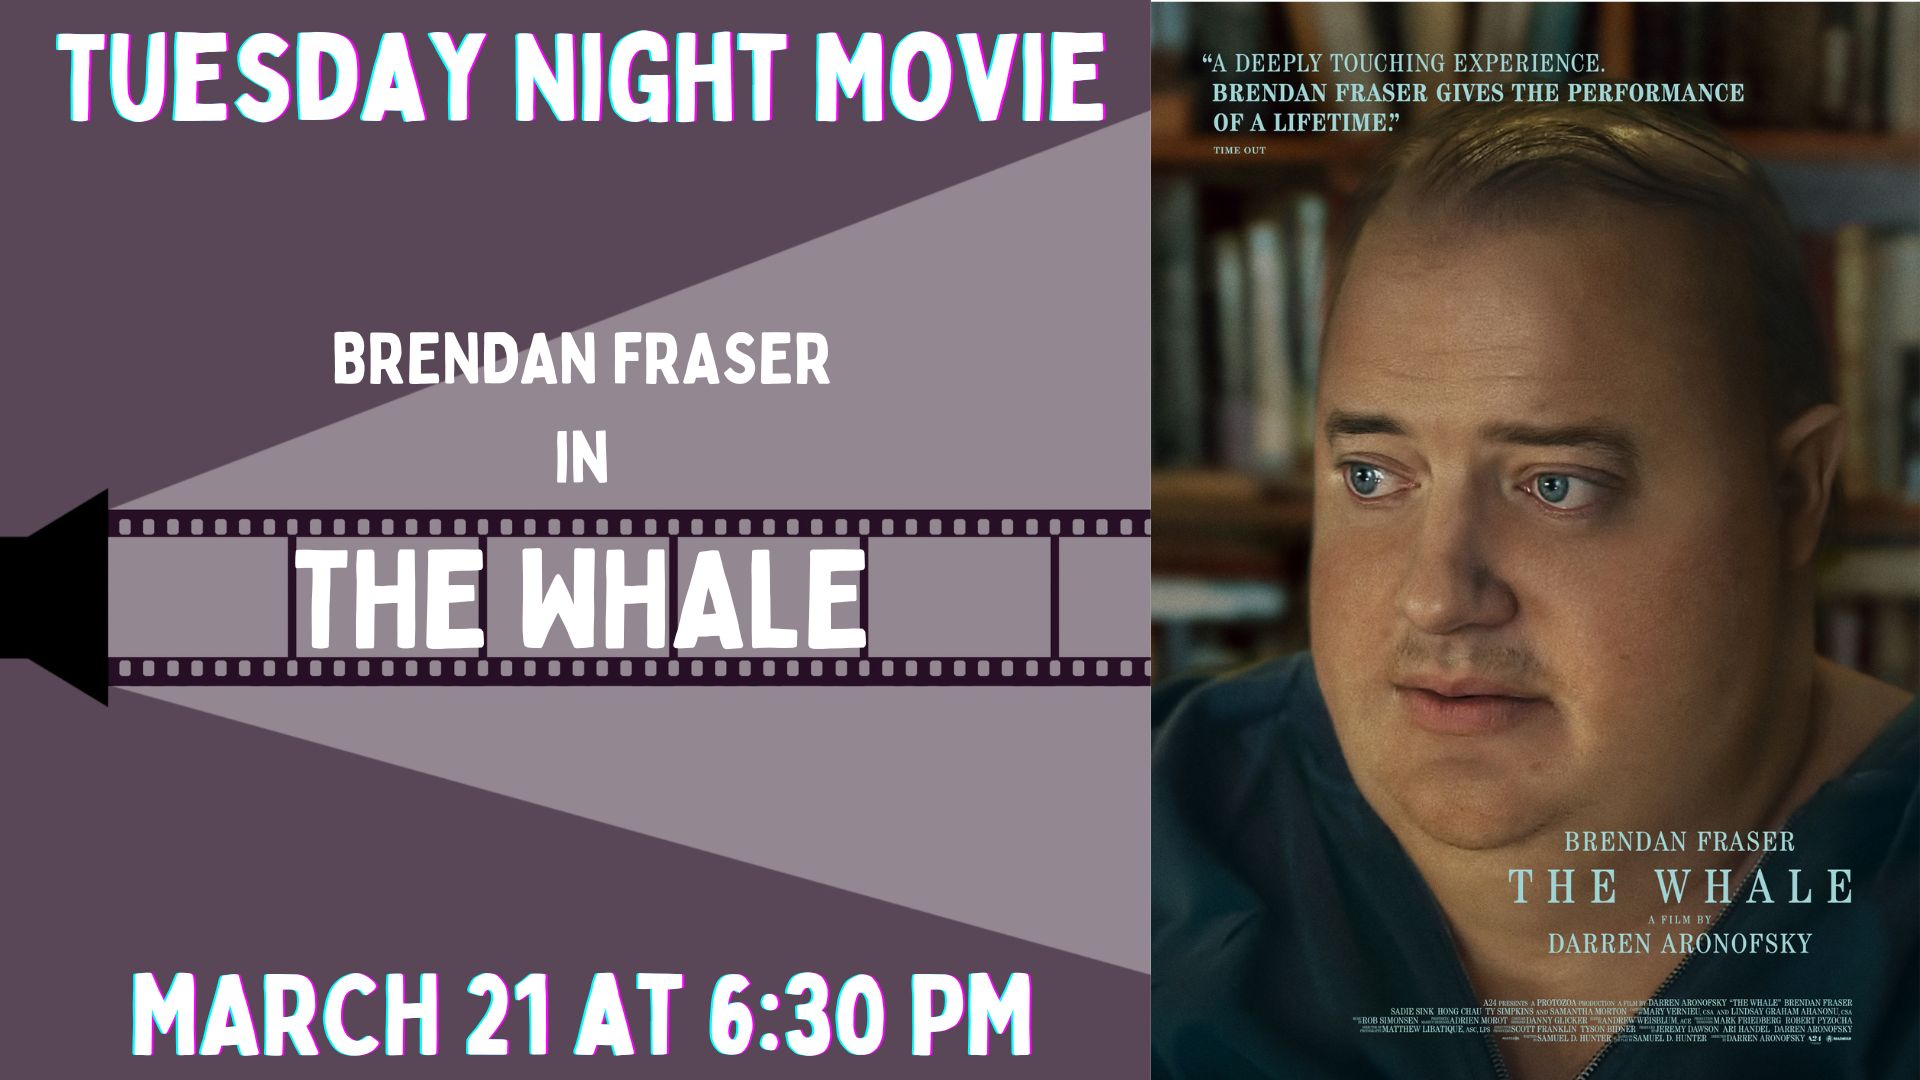 Banner advertising our screening of THE WHALE on March 21 at 6:30 PM